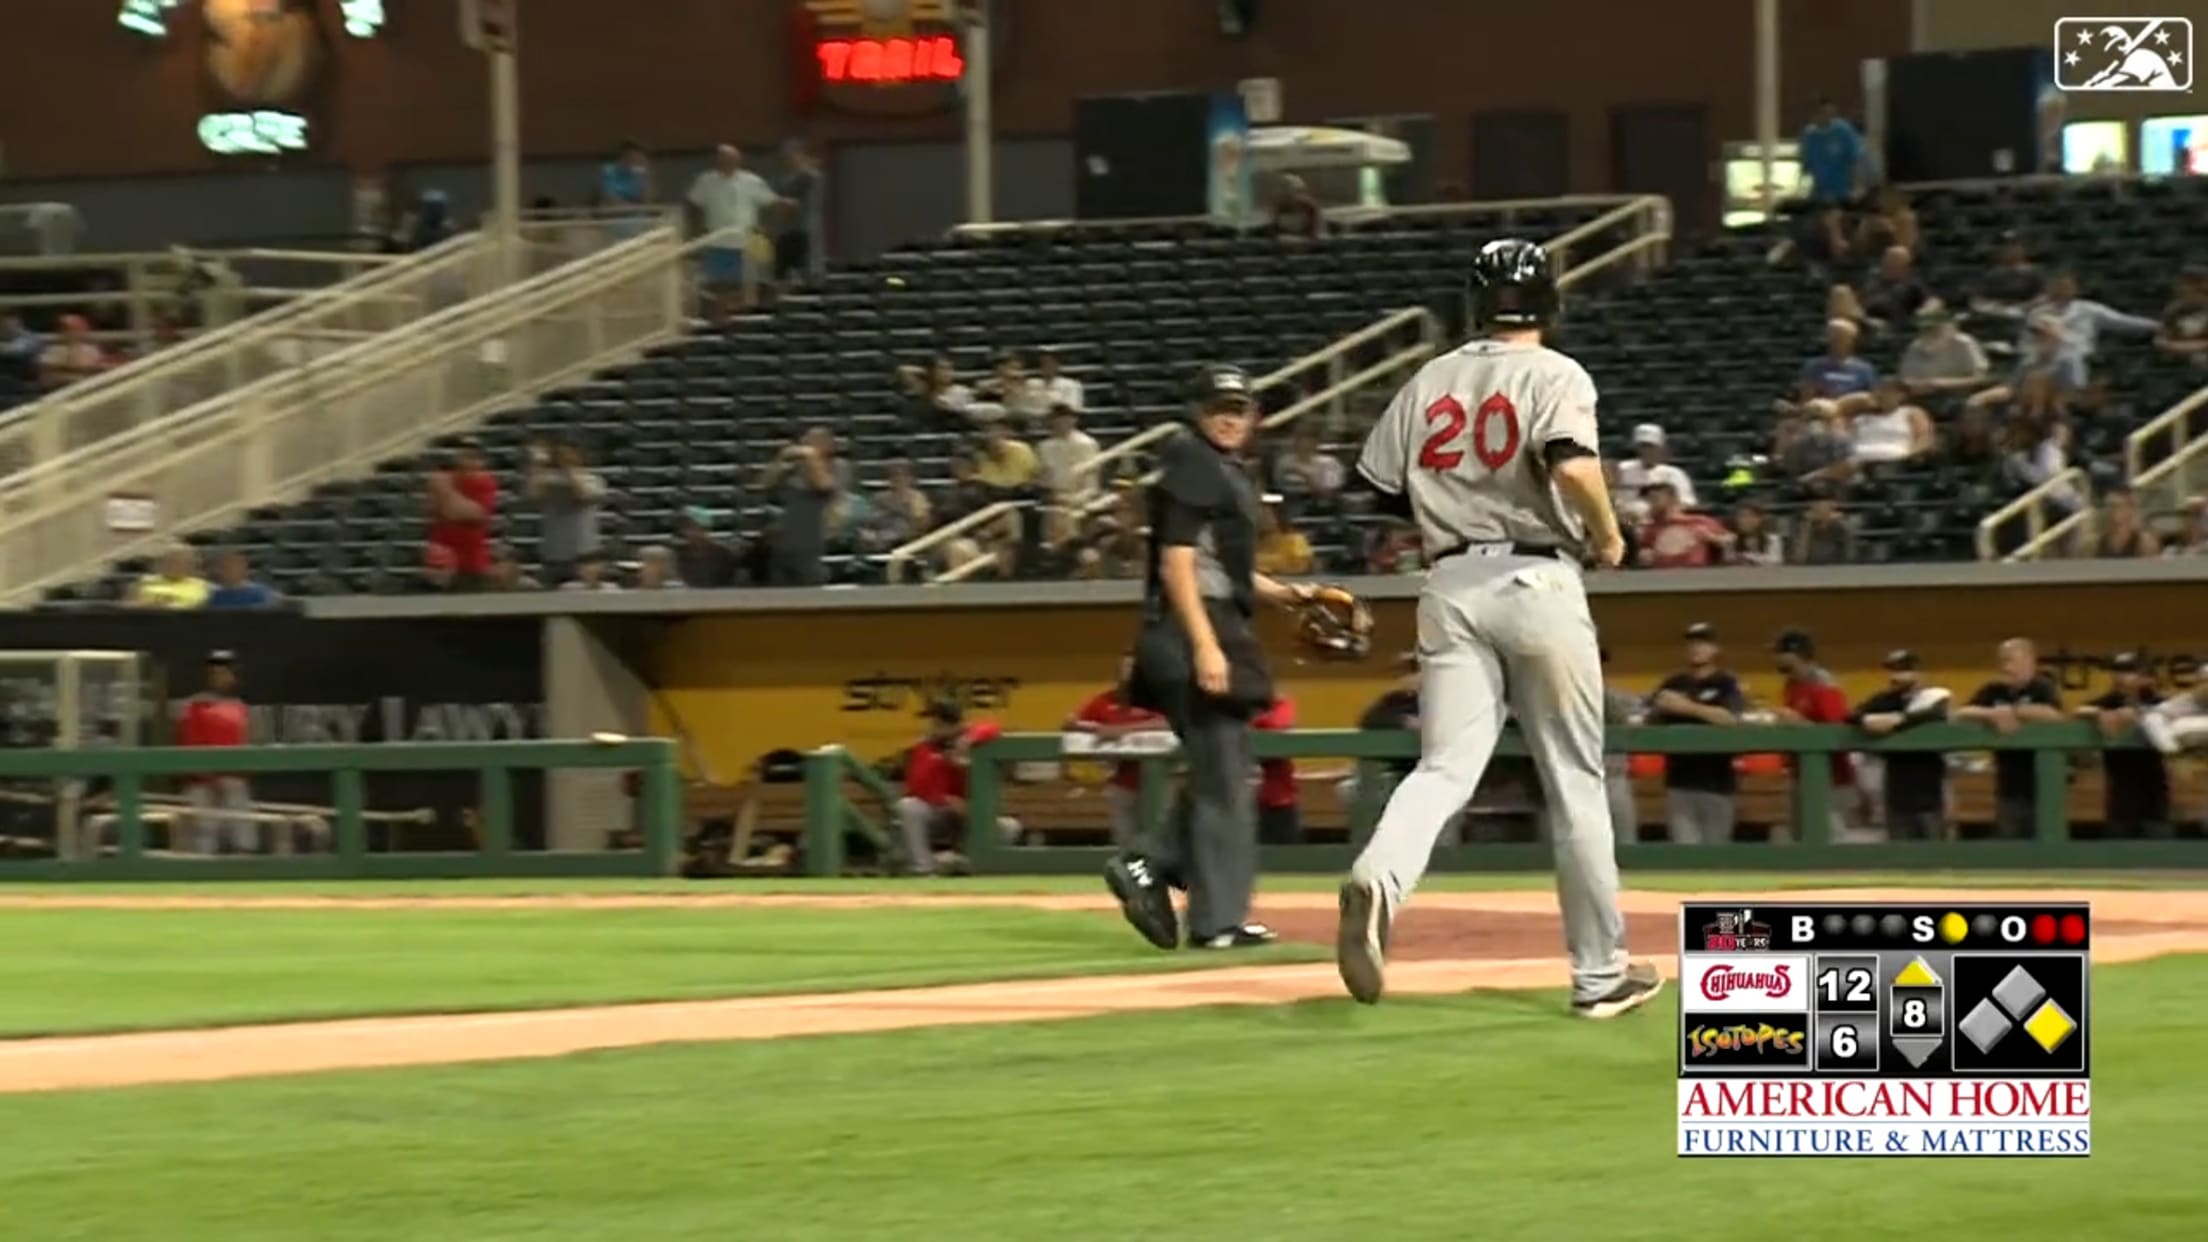 Rosario homers twice, drives in 6